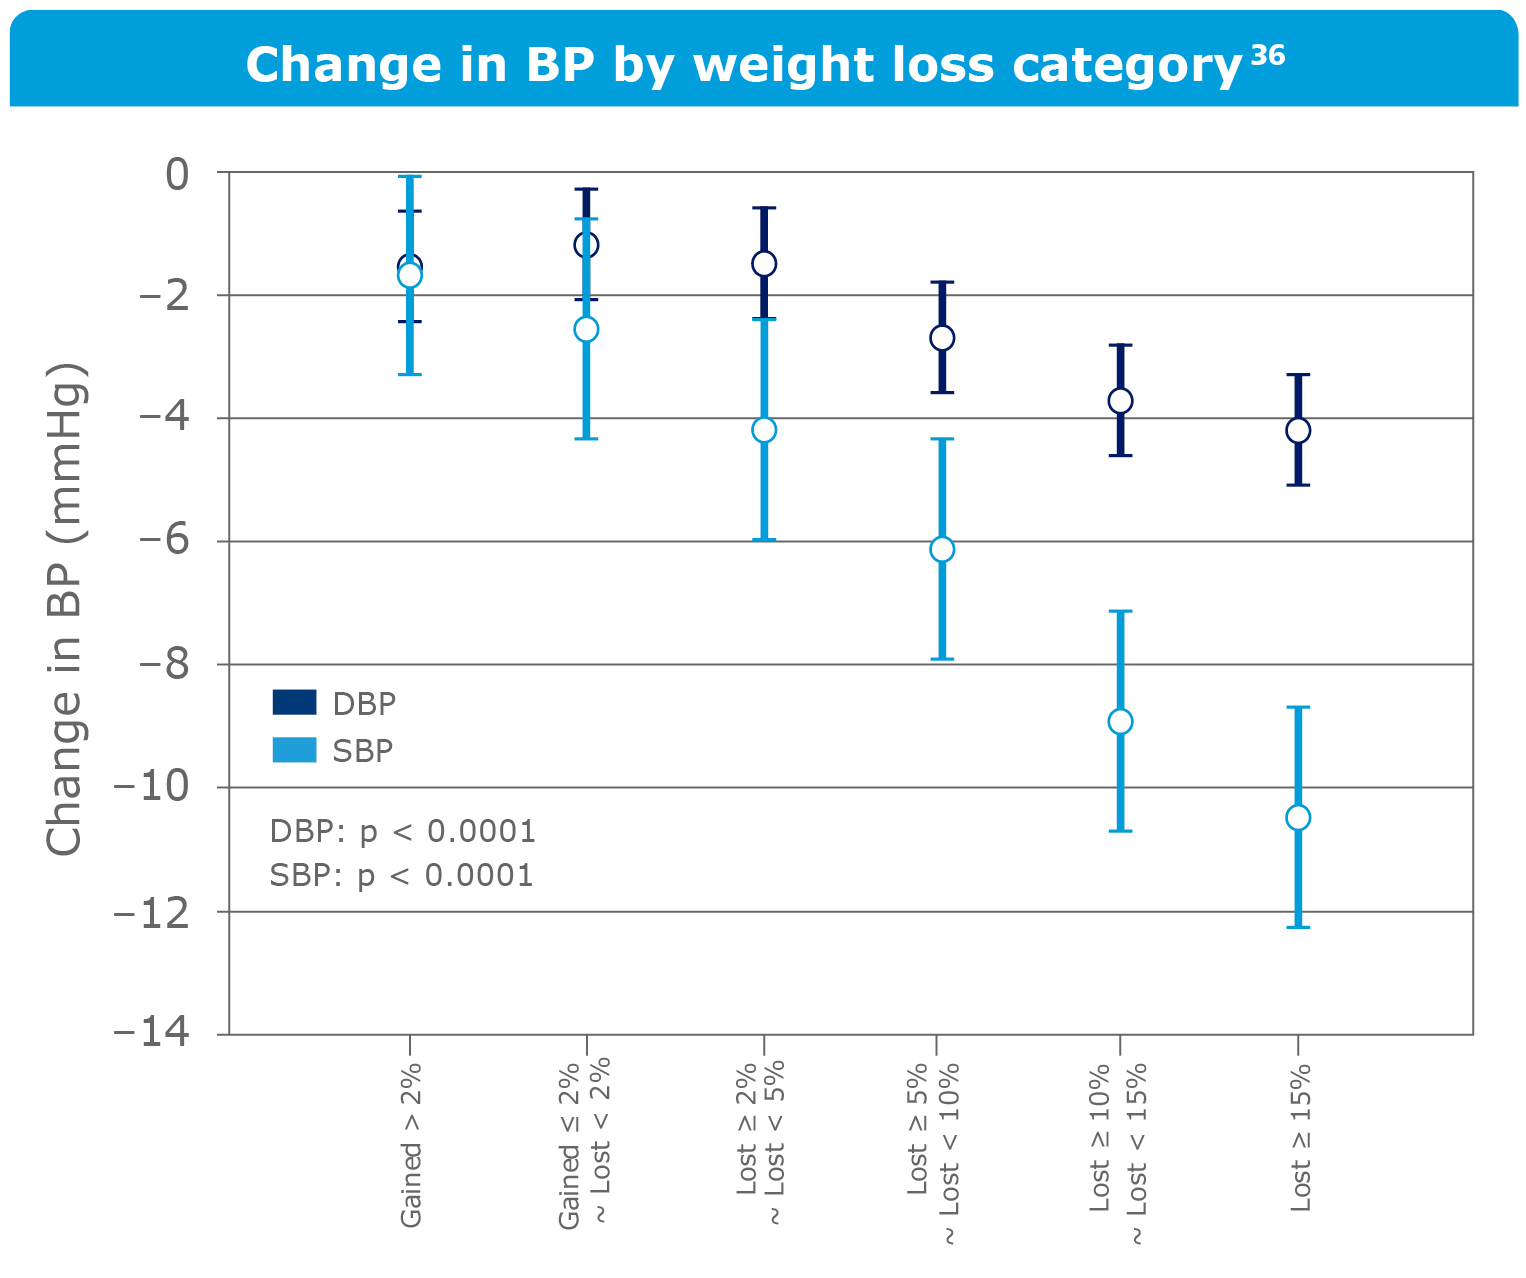 Change in blood pressure by weight loss category